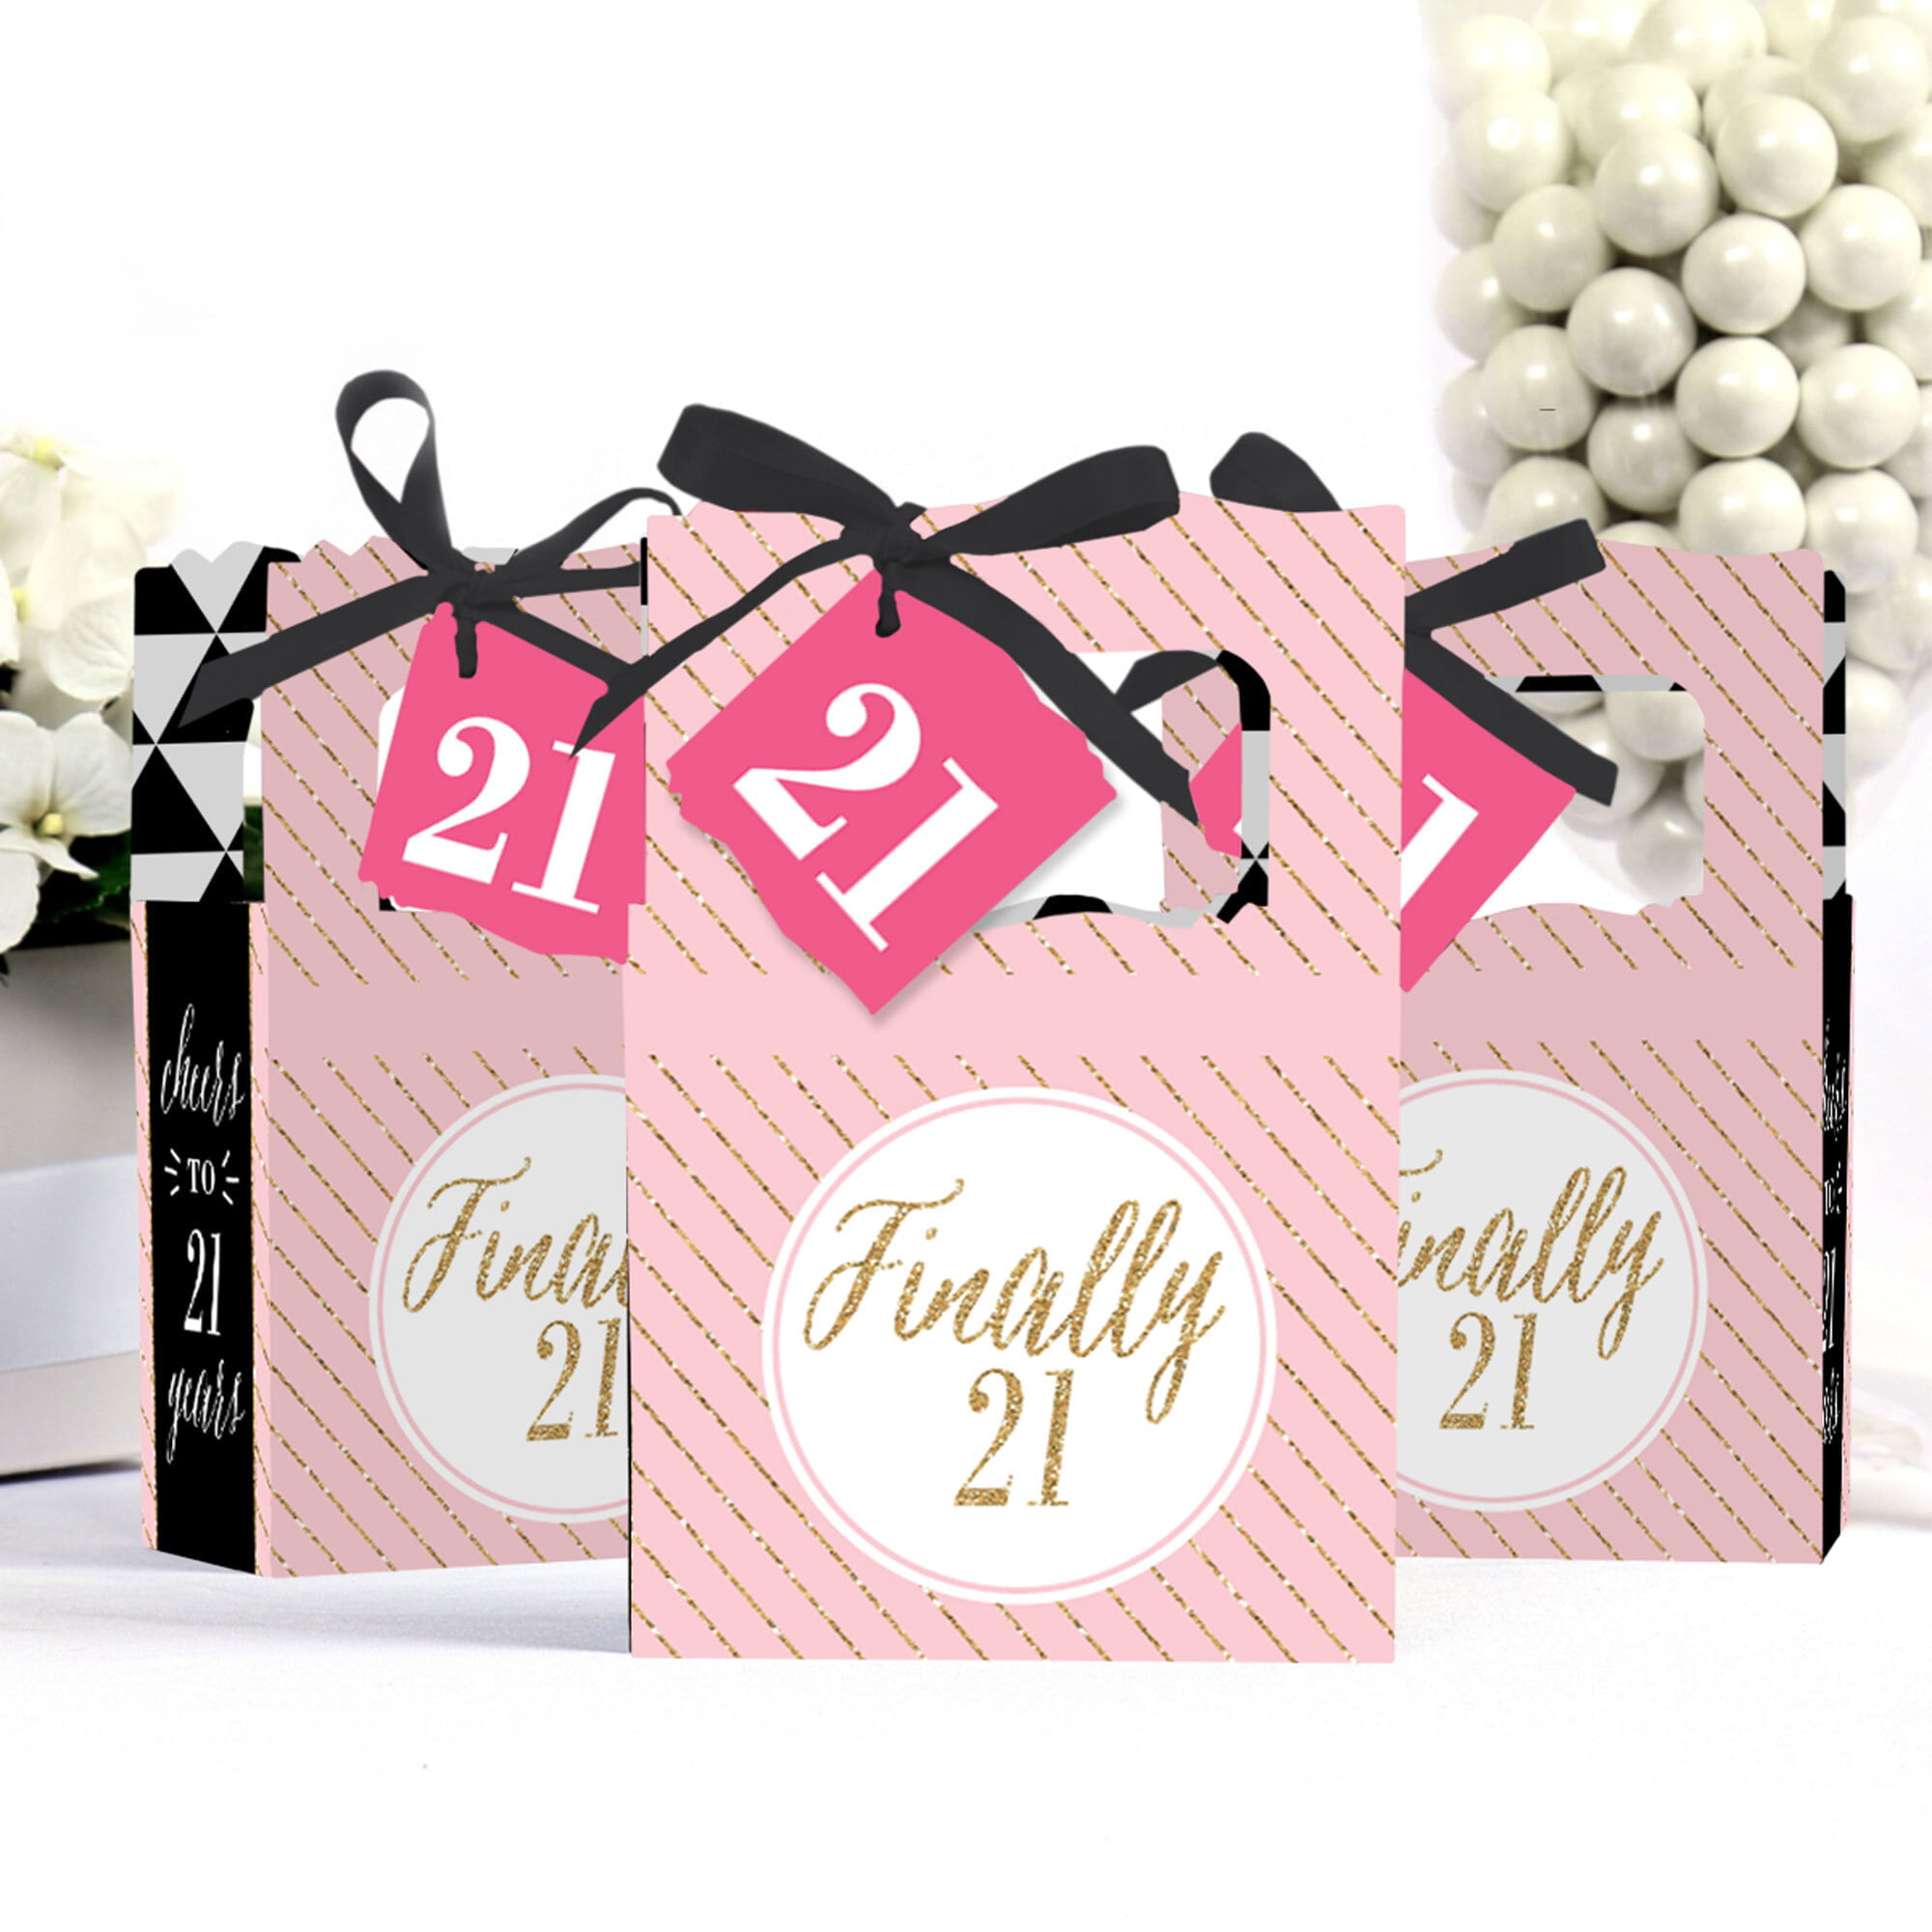 Big Dot of Happiness Finally 21 - 21st Birthday - DIY Party Supplies -  Birthday Party DIY Wrapper Favors & Decorations - Set of 15